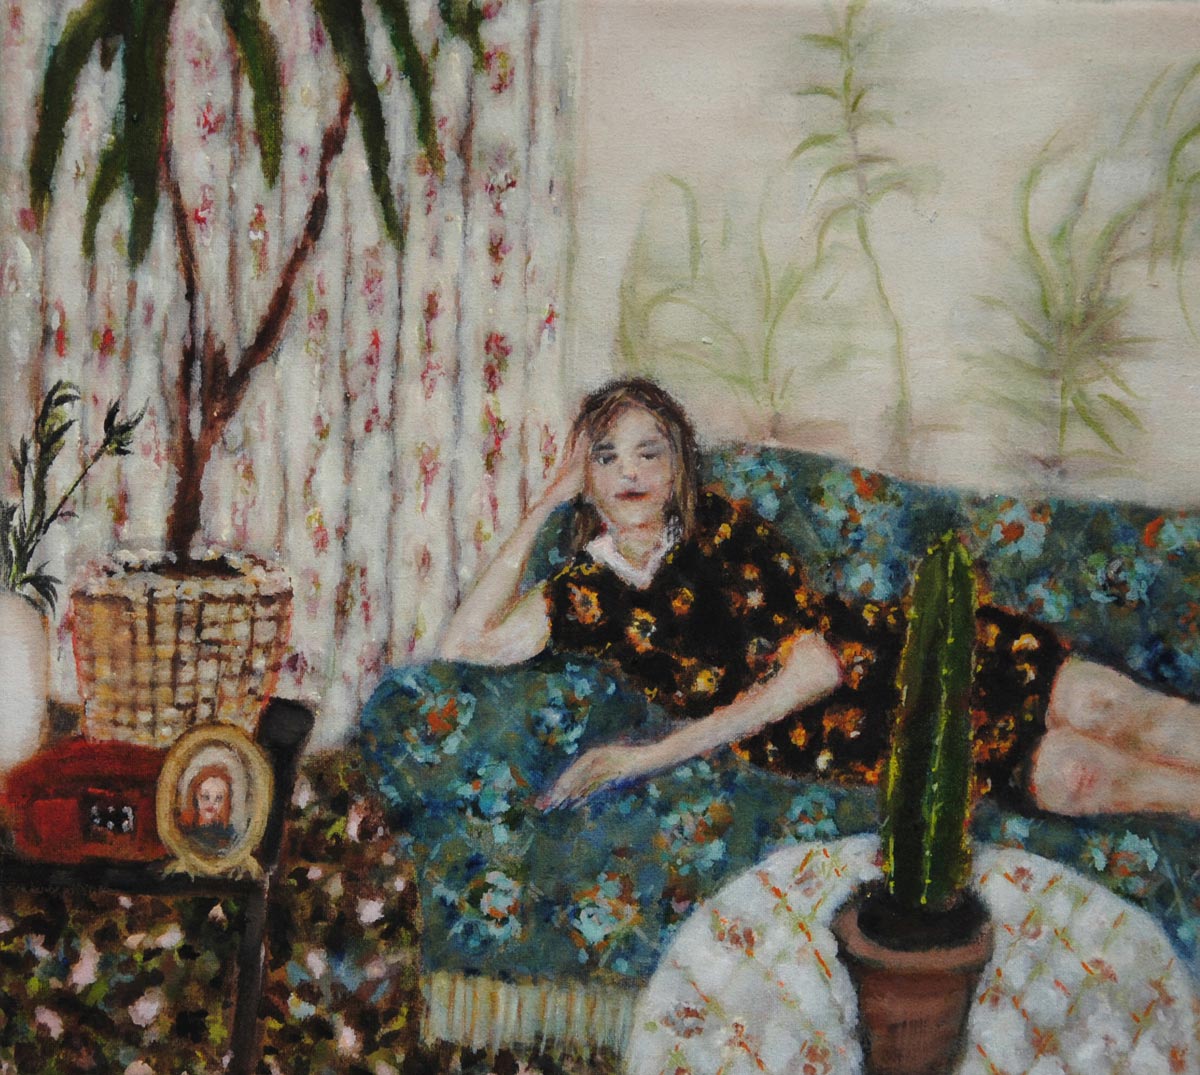 Home sweet home – 25 x 28 cm, oil on canvas, 2012